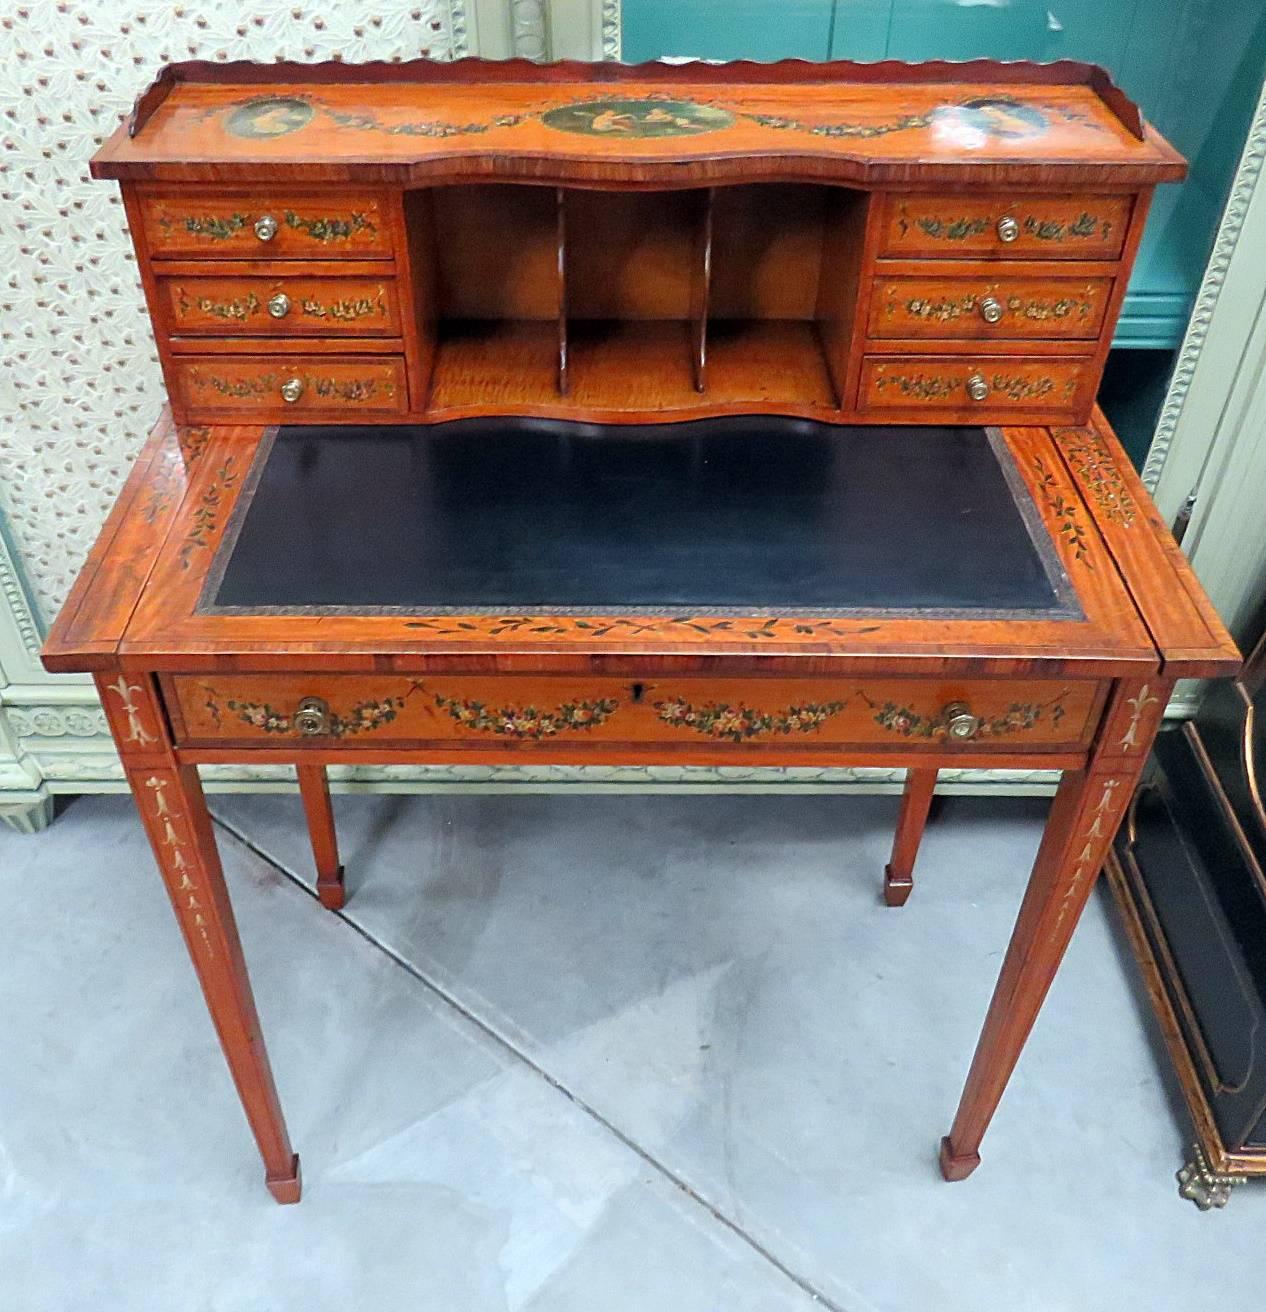 Adams style ladies desk with seven drawers and a pull-out desk. Desk is 22